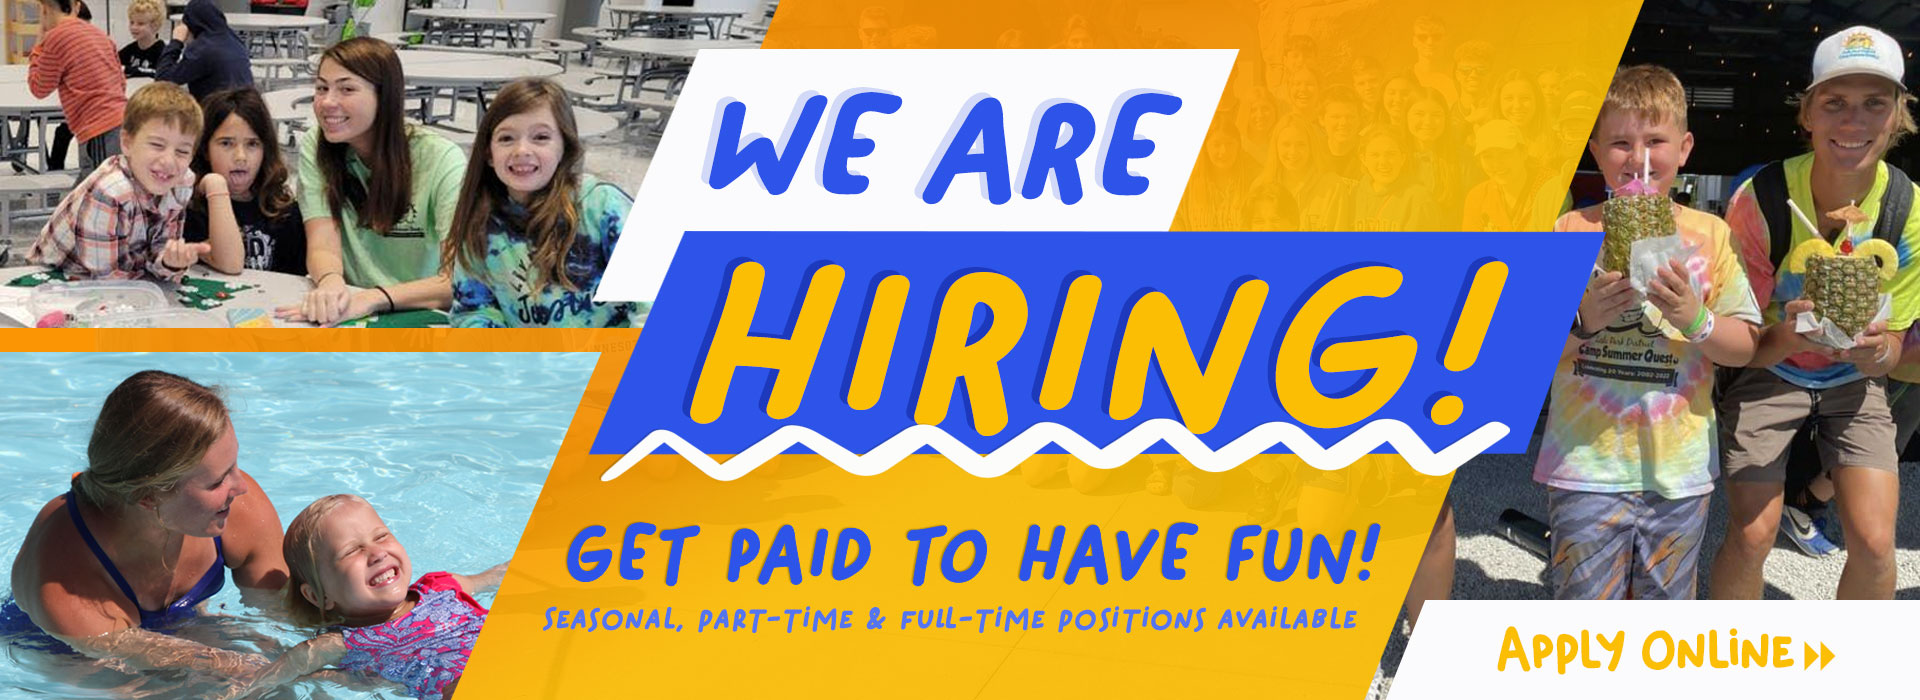 We Are Hiring - Get Paid to Have Fun!